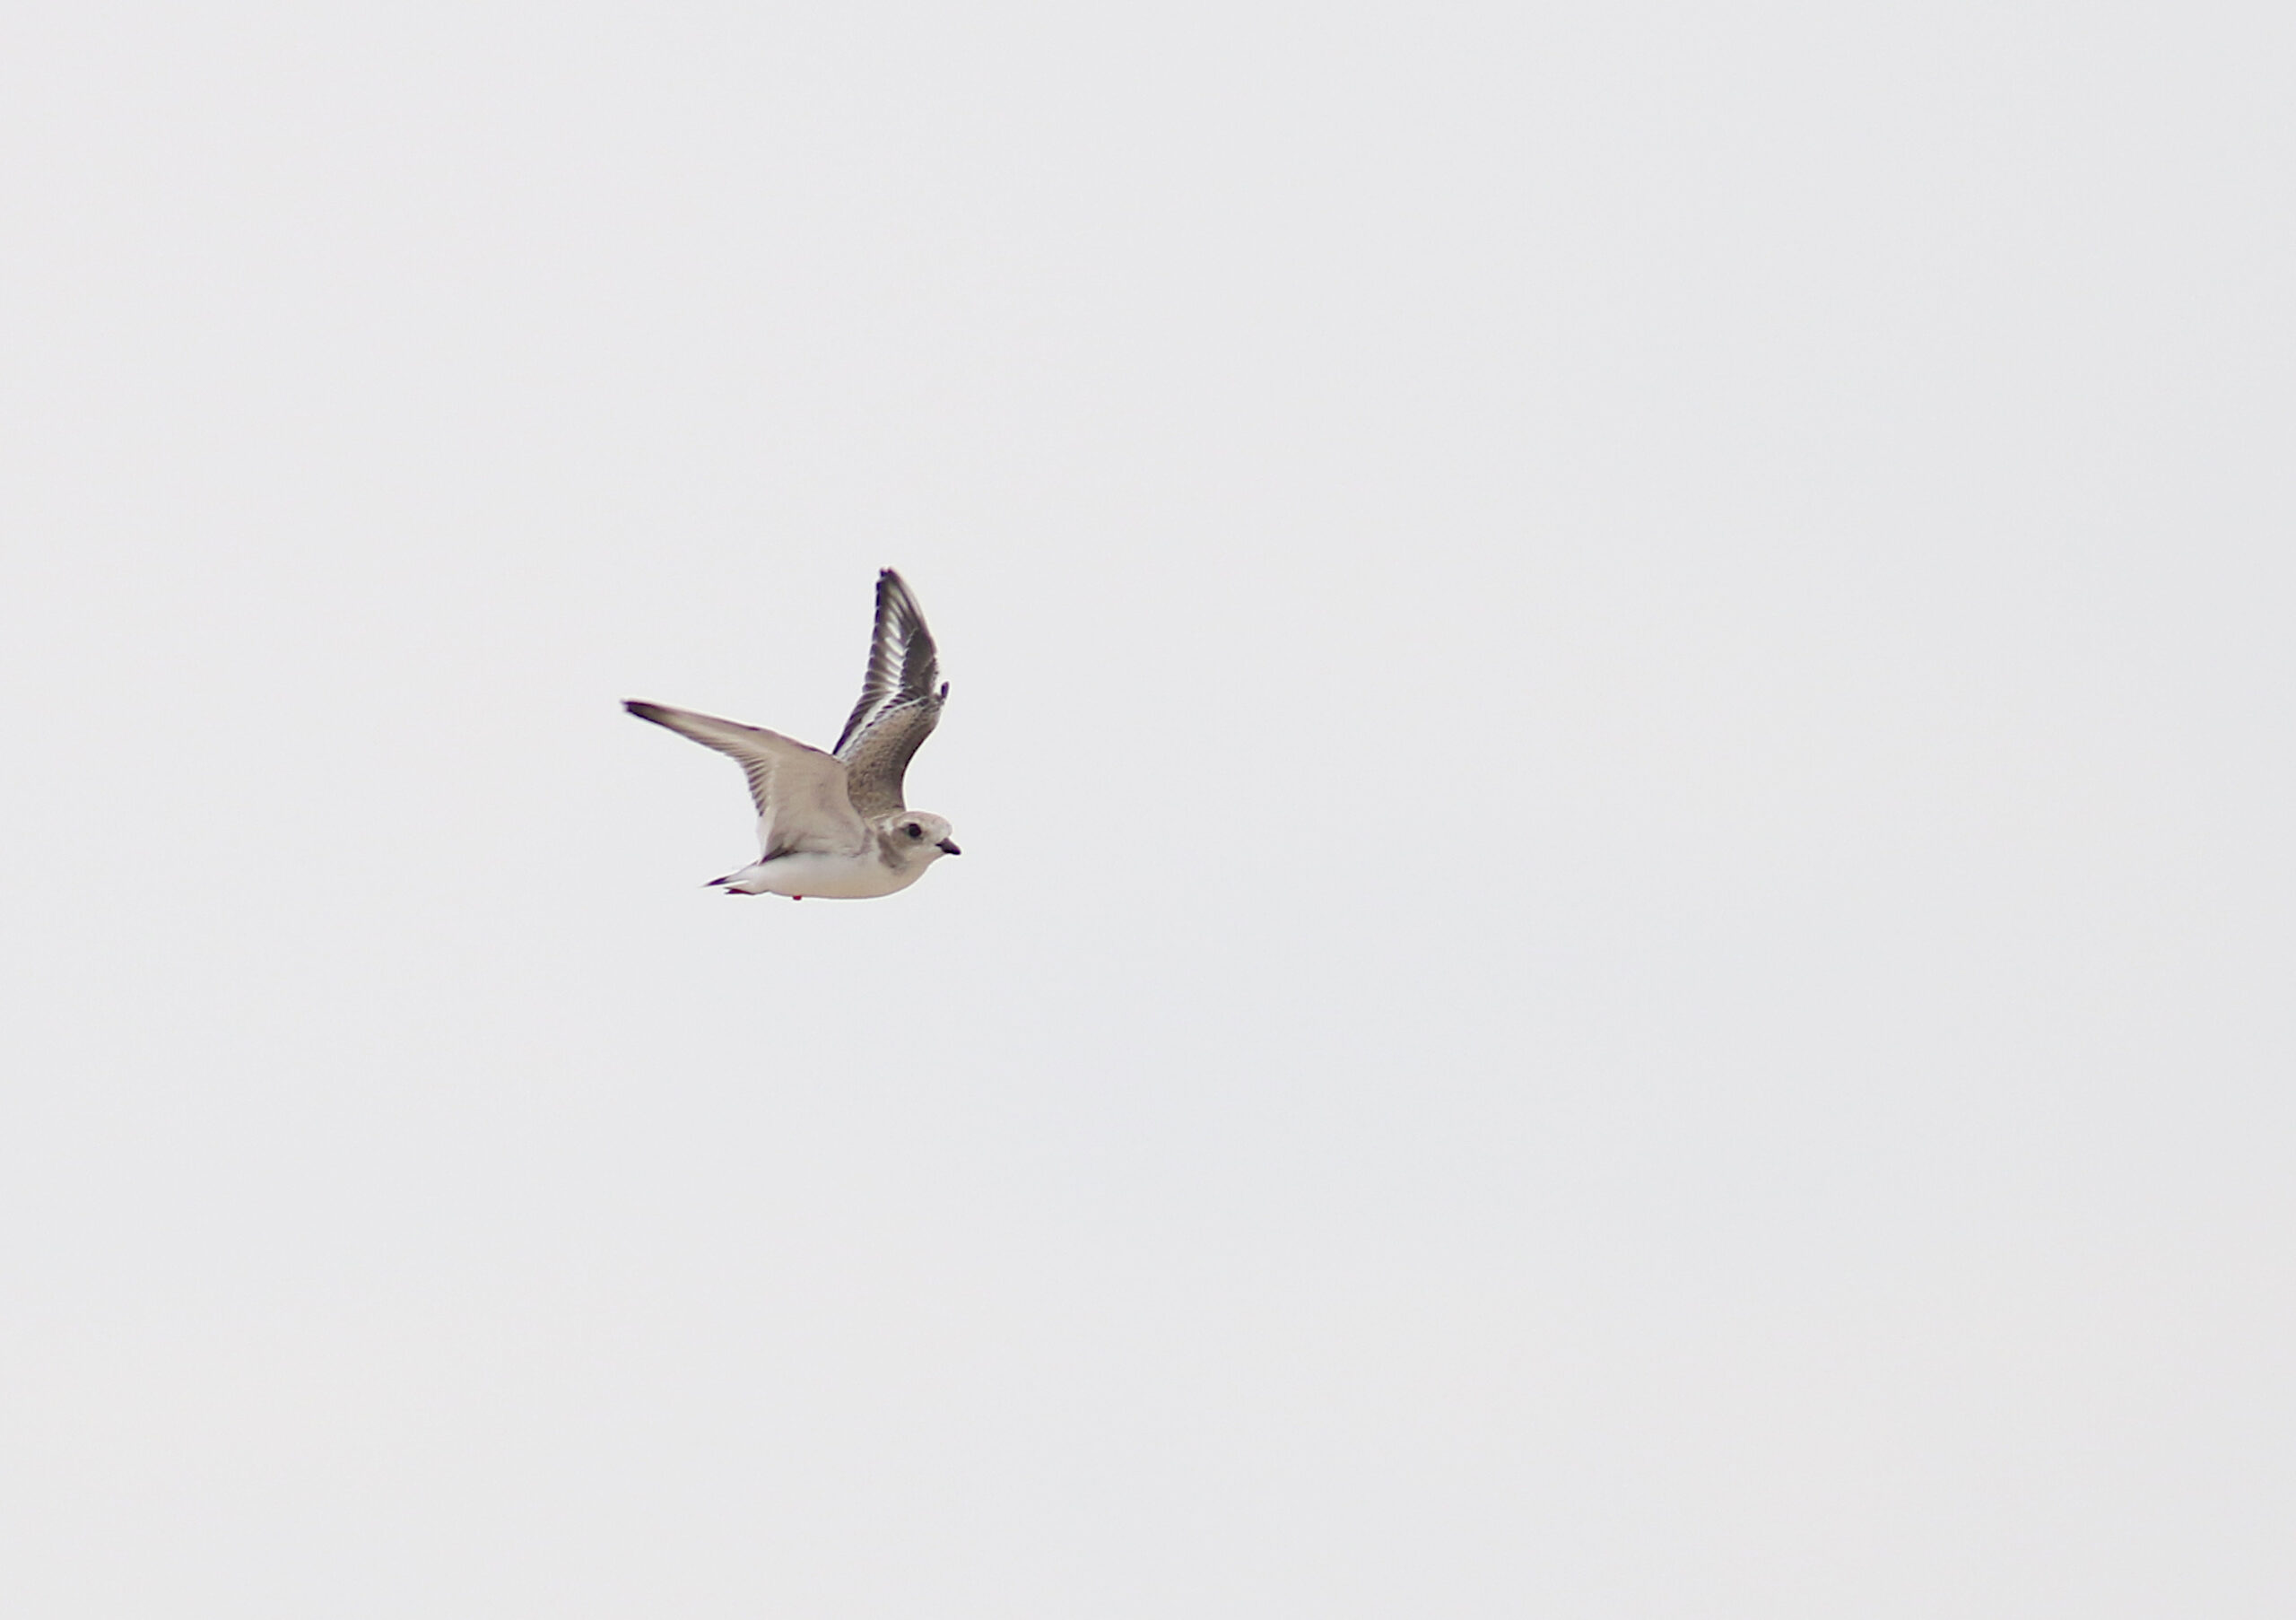 A piping plover chick, raised in captivity, is released in Green Bay.